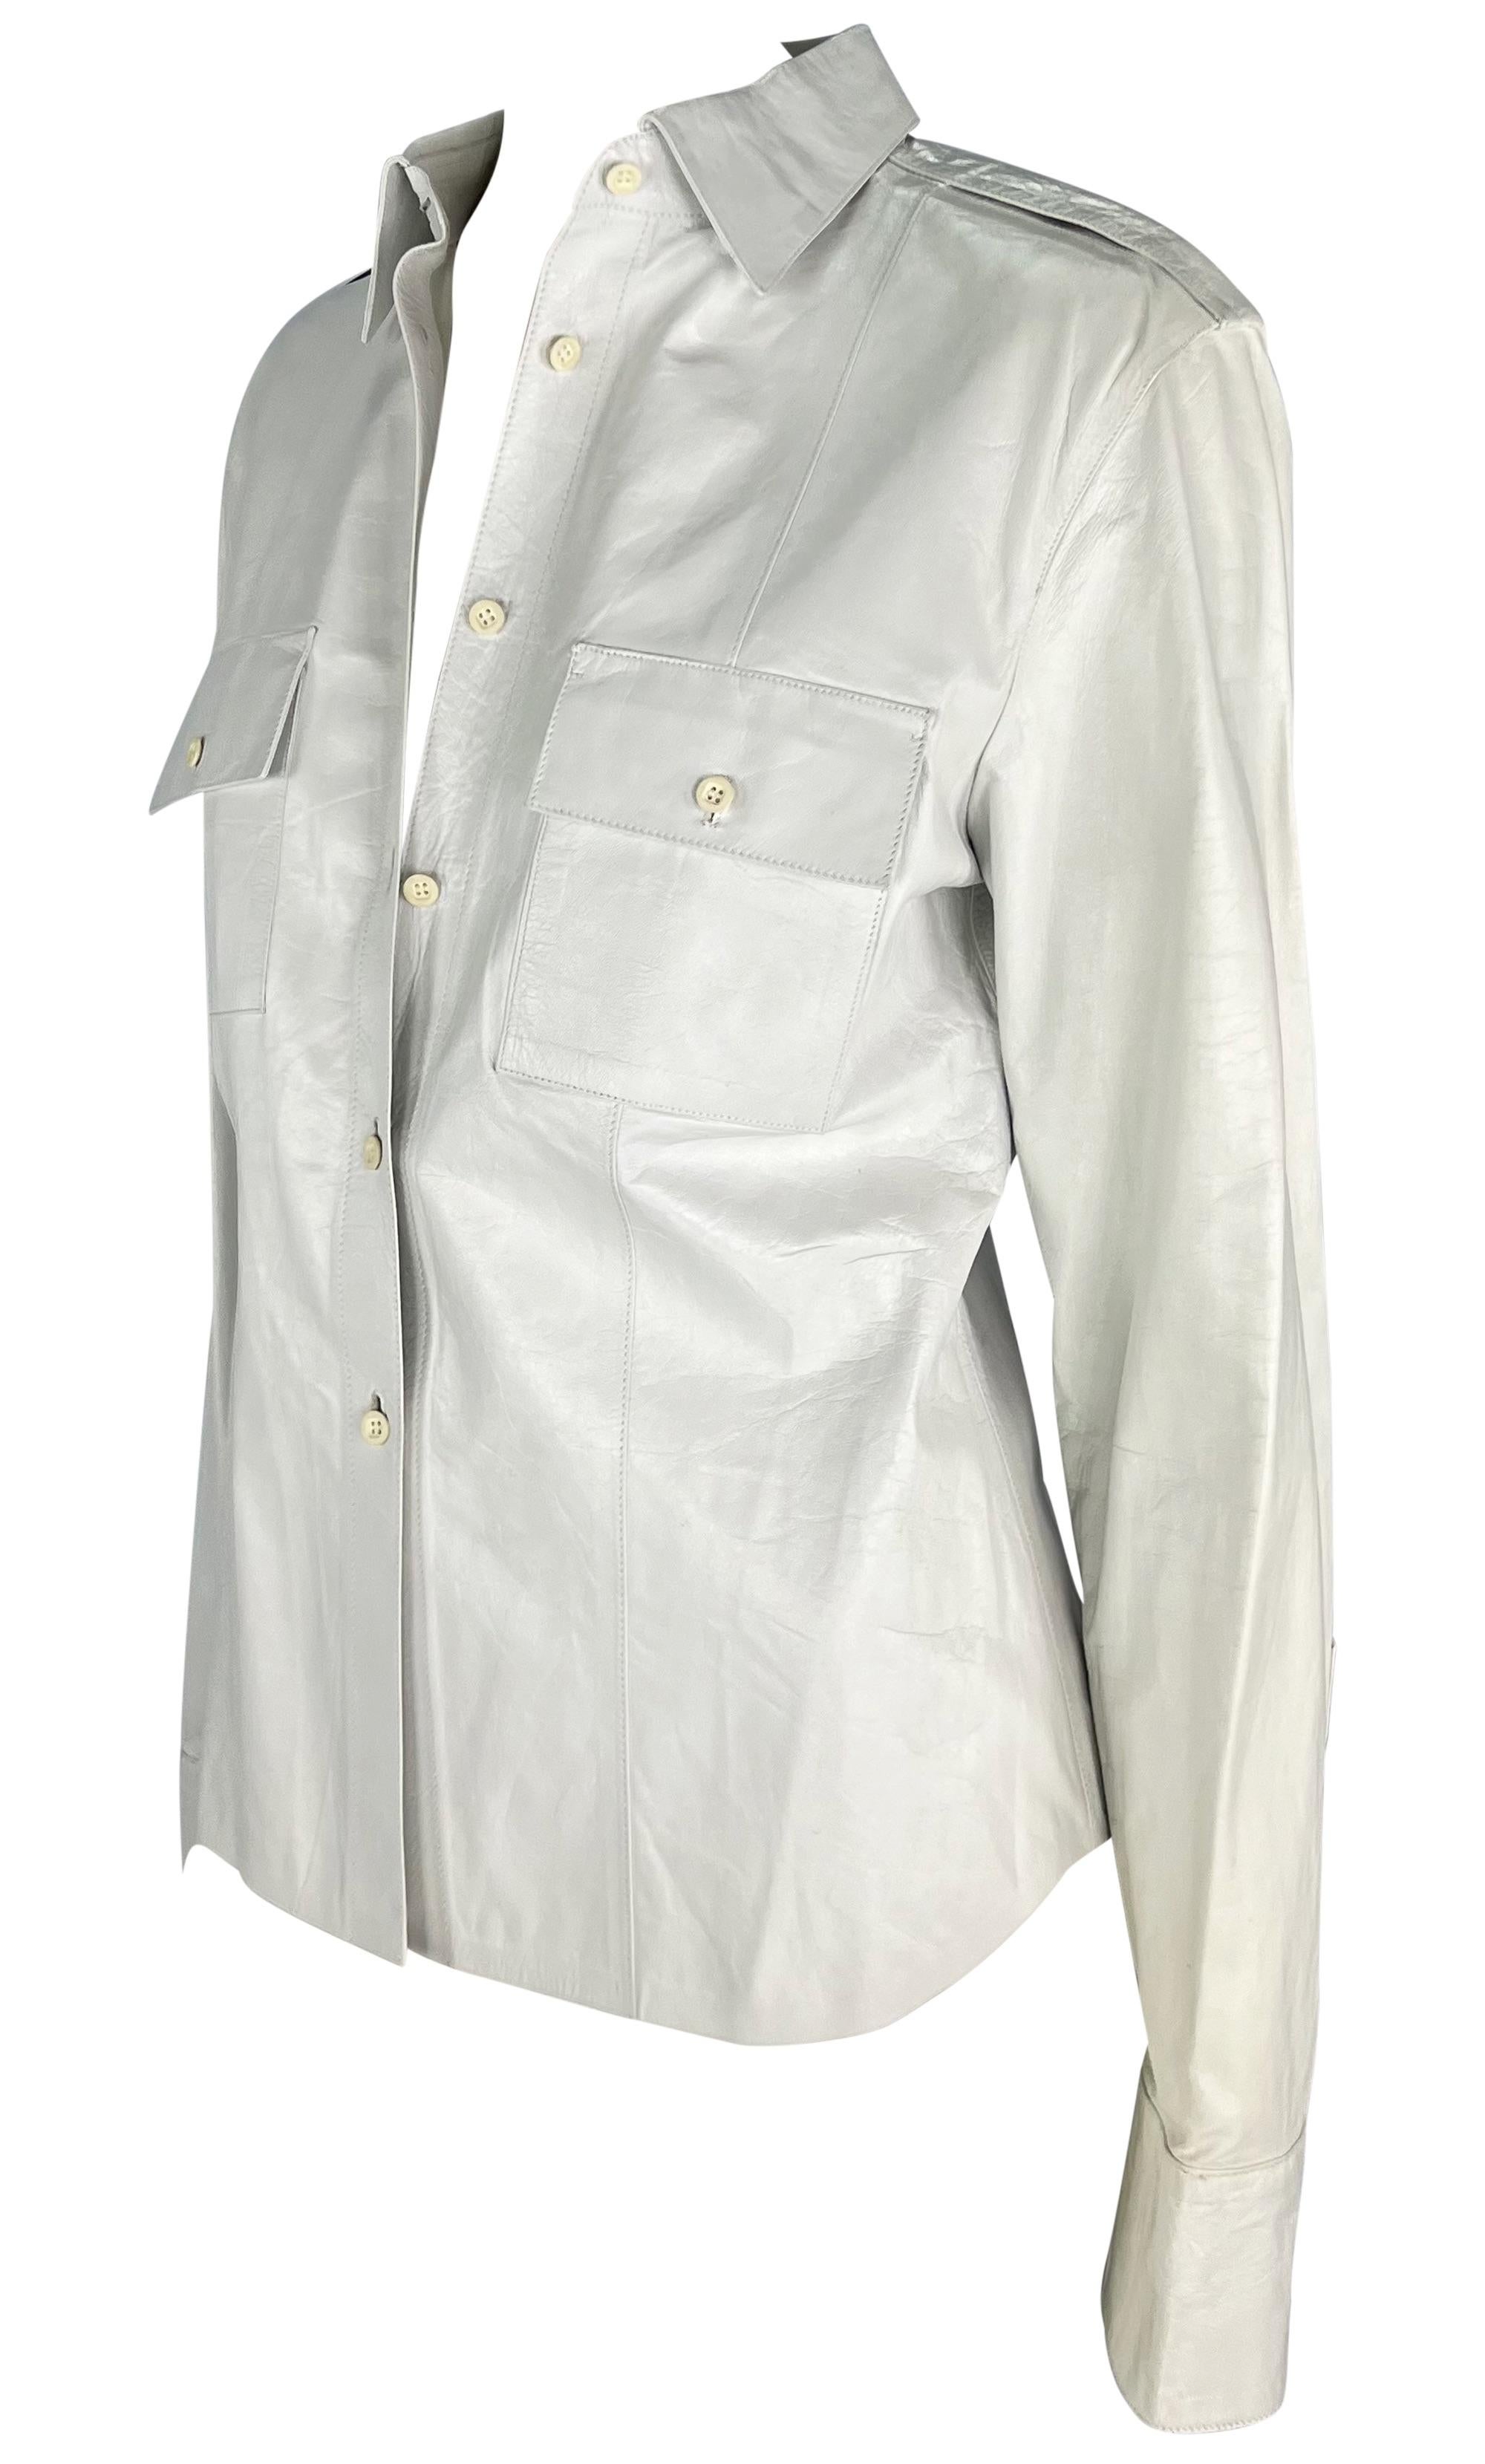 Tom Ford designed this white leather Gucci shirt jacket for the Spring/Summer 2001 collection. This classic collared shirt is constructed entirely of shiny white leather and is complete with fold-over pockets at the bust and chic epaulets.